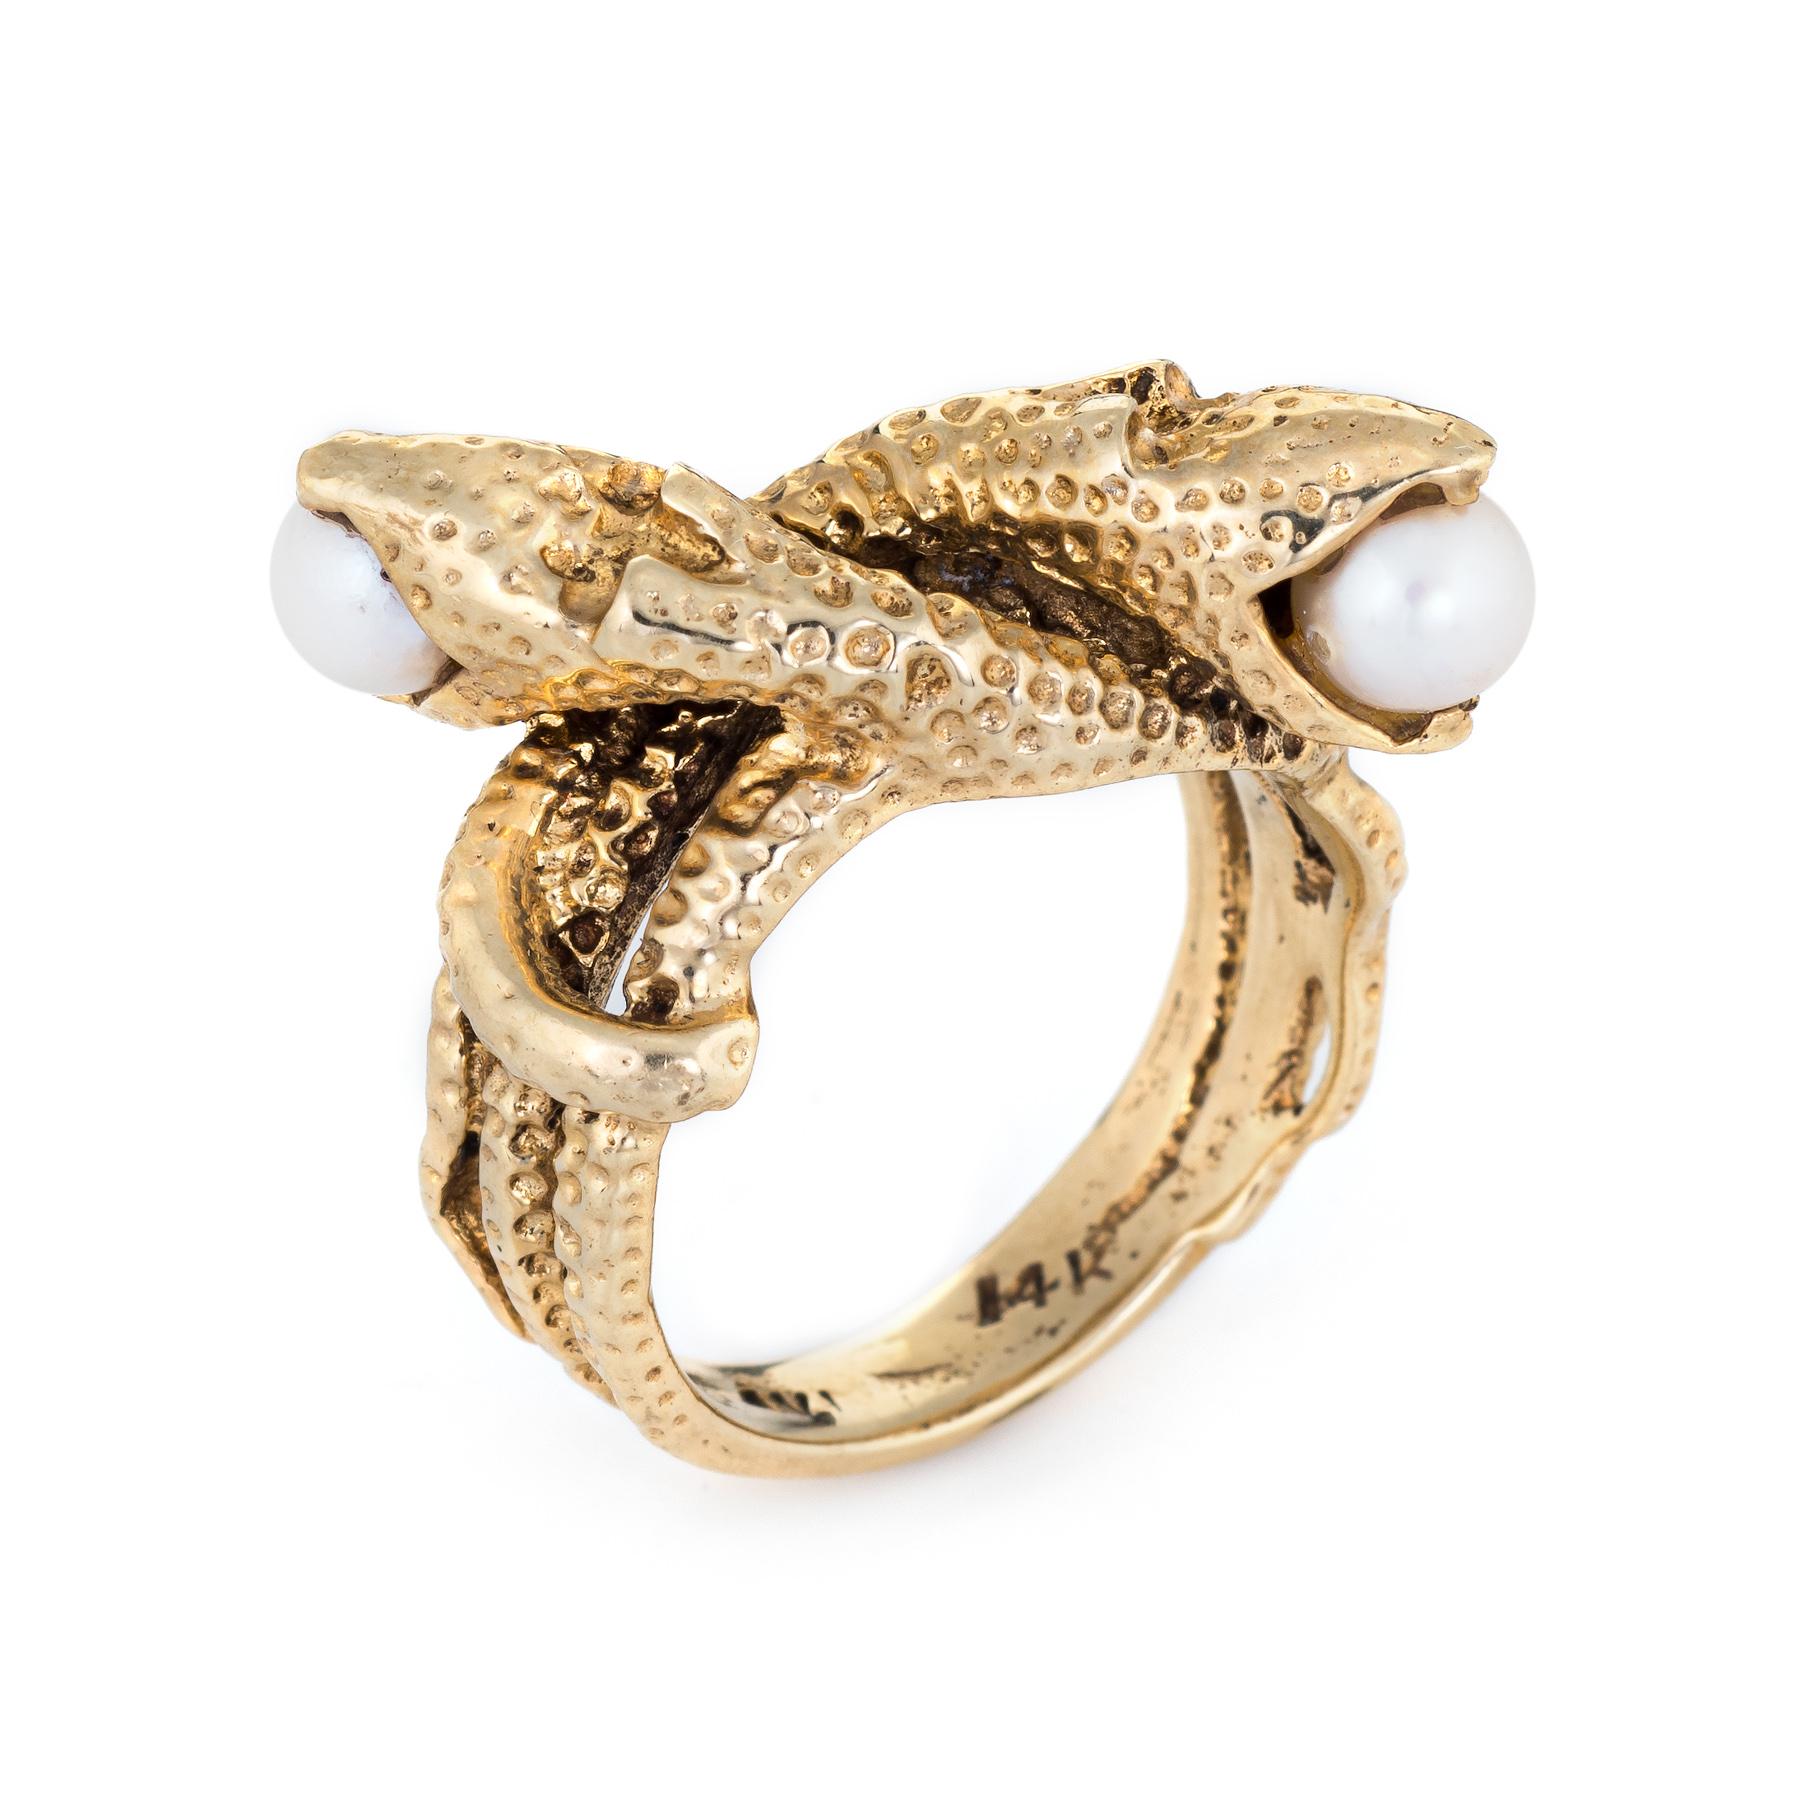 Finely detailed vintage double headed snake ring, crafted in 14 karat yellow gold. 

Two cultured pearls measure 5mm and are set into the snakes mouth. 

The two snakes face in opposite directions with cultured pearls set into each mouth. The body